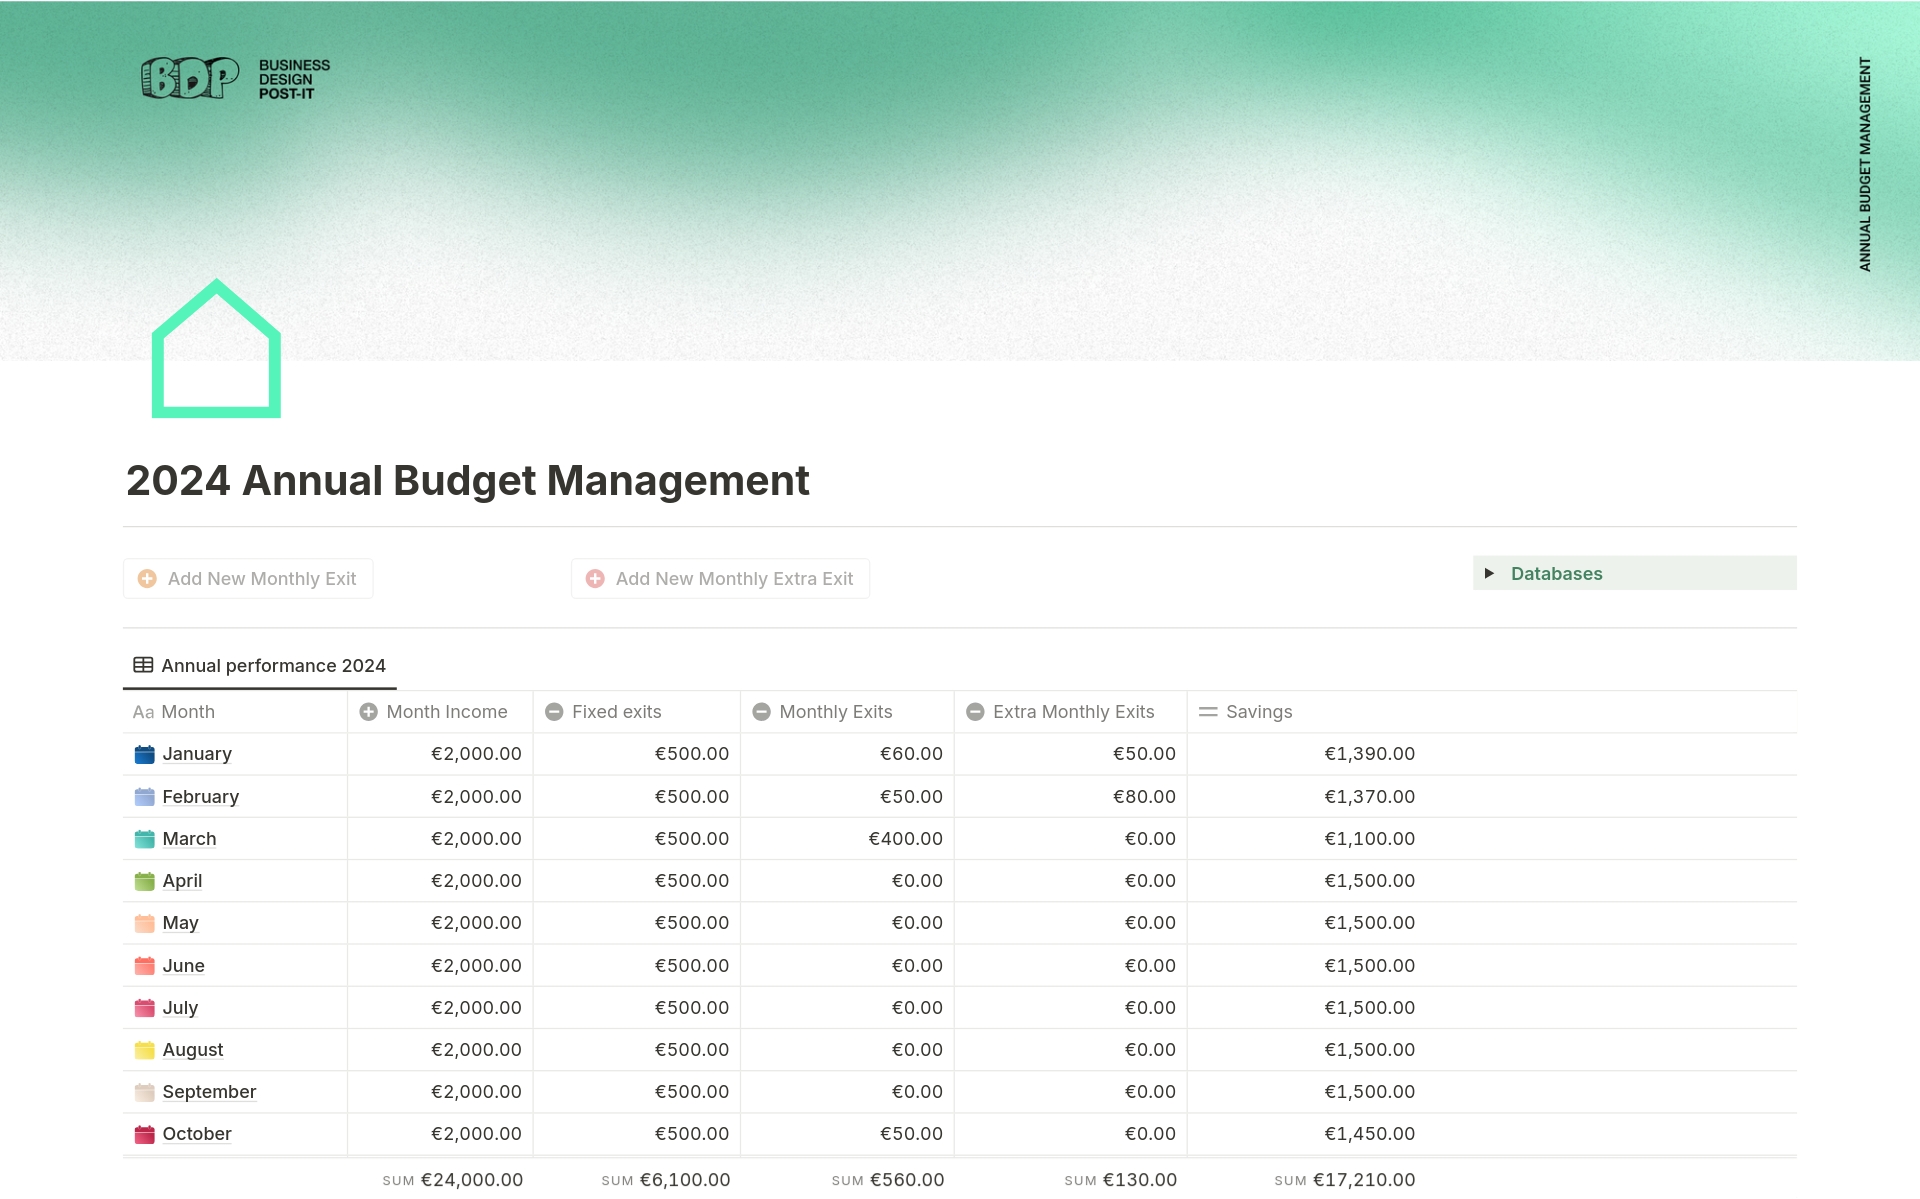 Template for tracking annual income and major expenditures. 
Main features:
- View total earnings
- Keep track of annual fixed expenses
- Add extra expenses for each month
- View annual savings minus expenses to be incurred
- Keep track of due dates for major annual payments